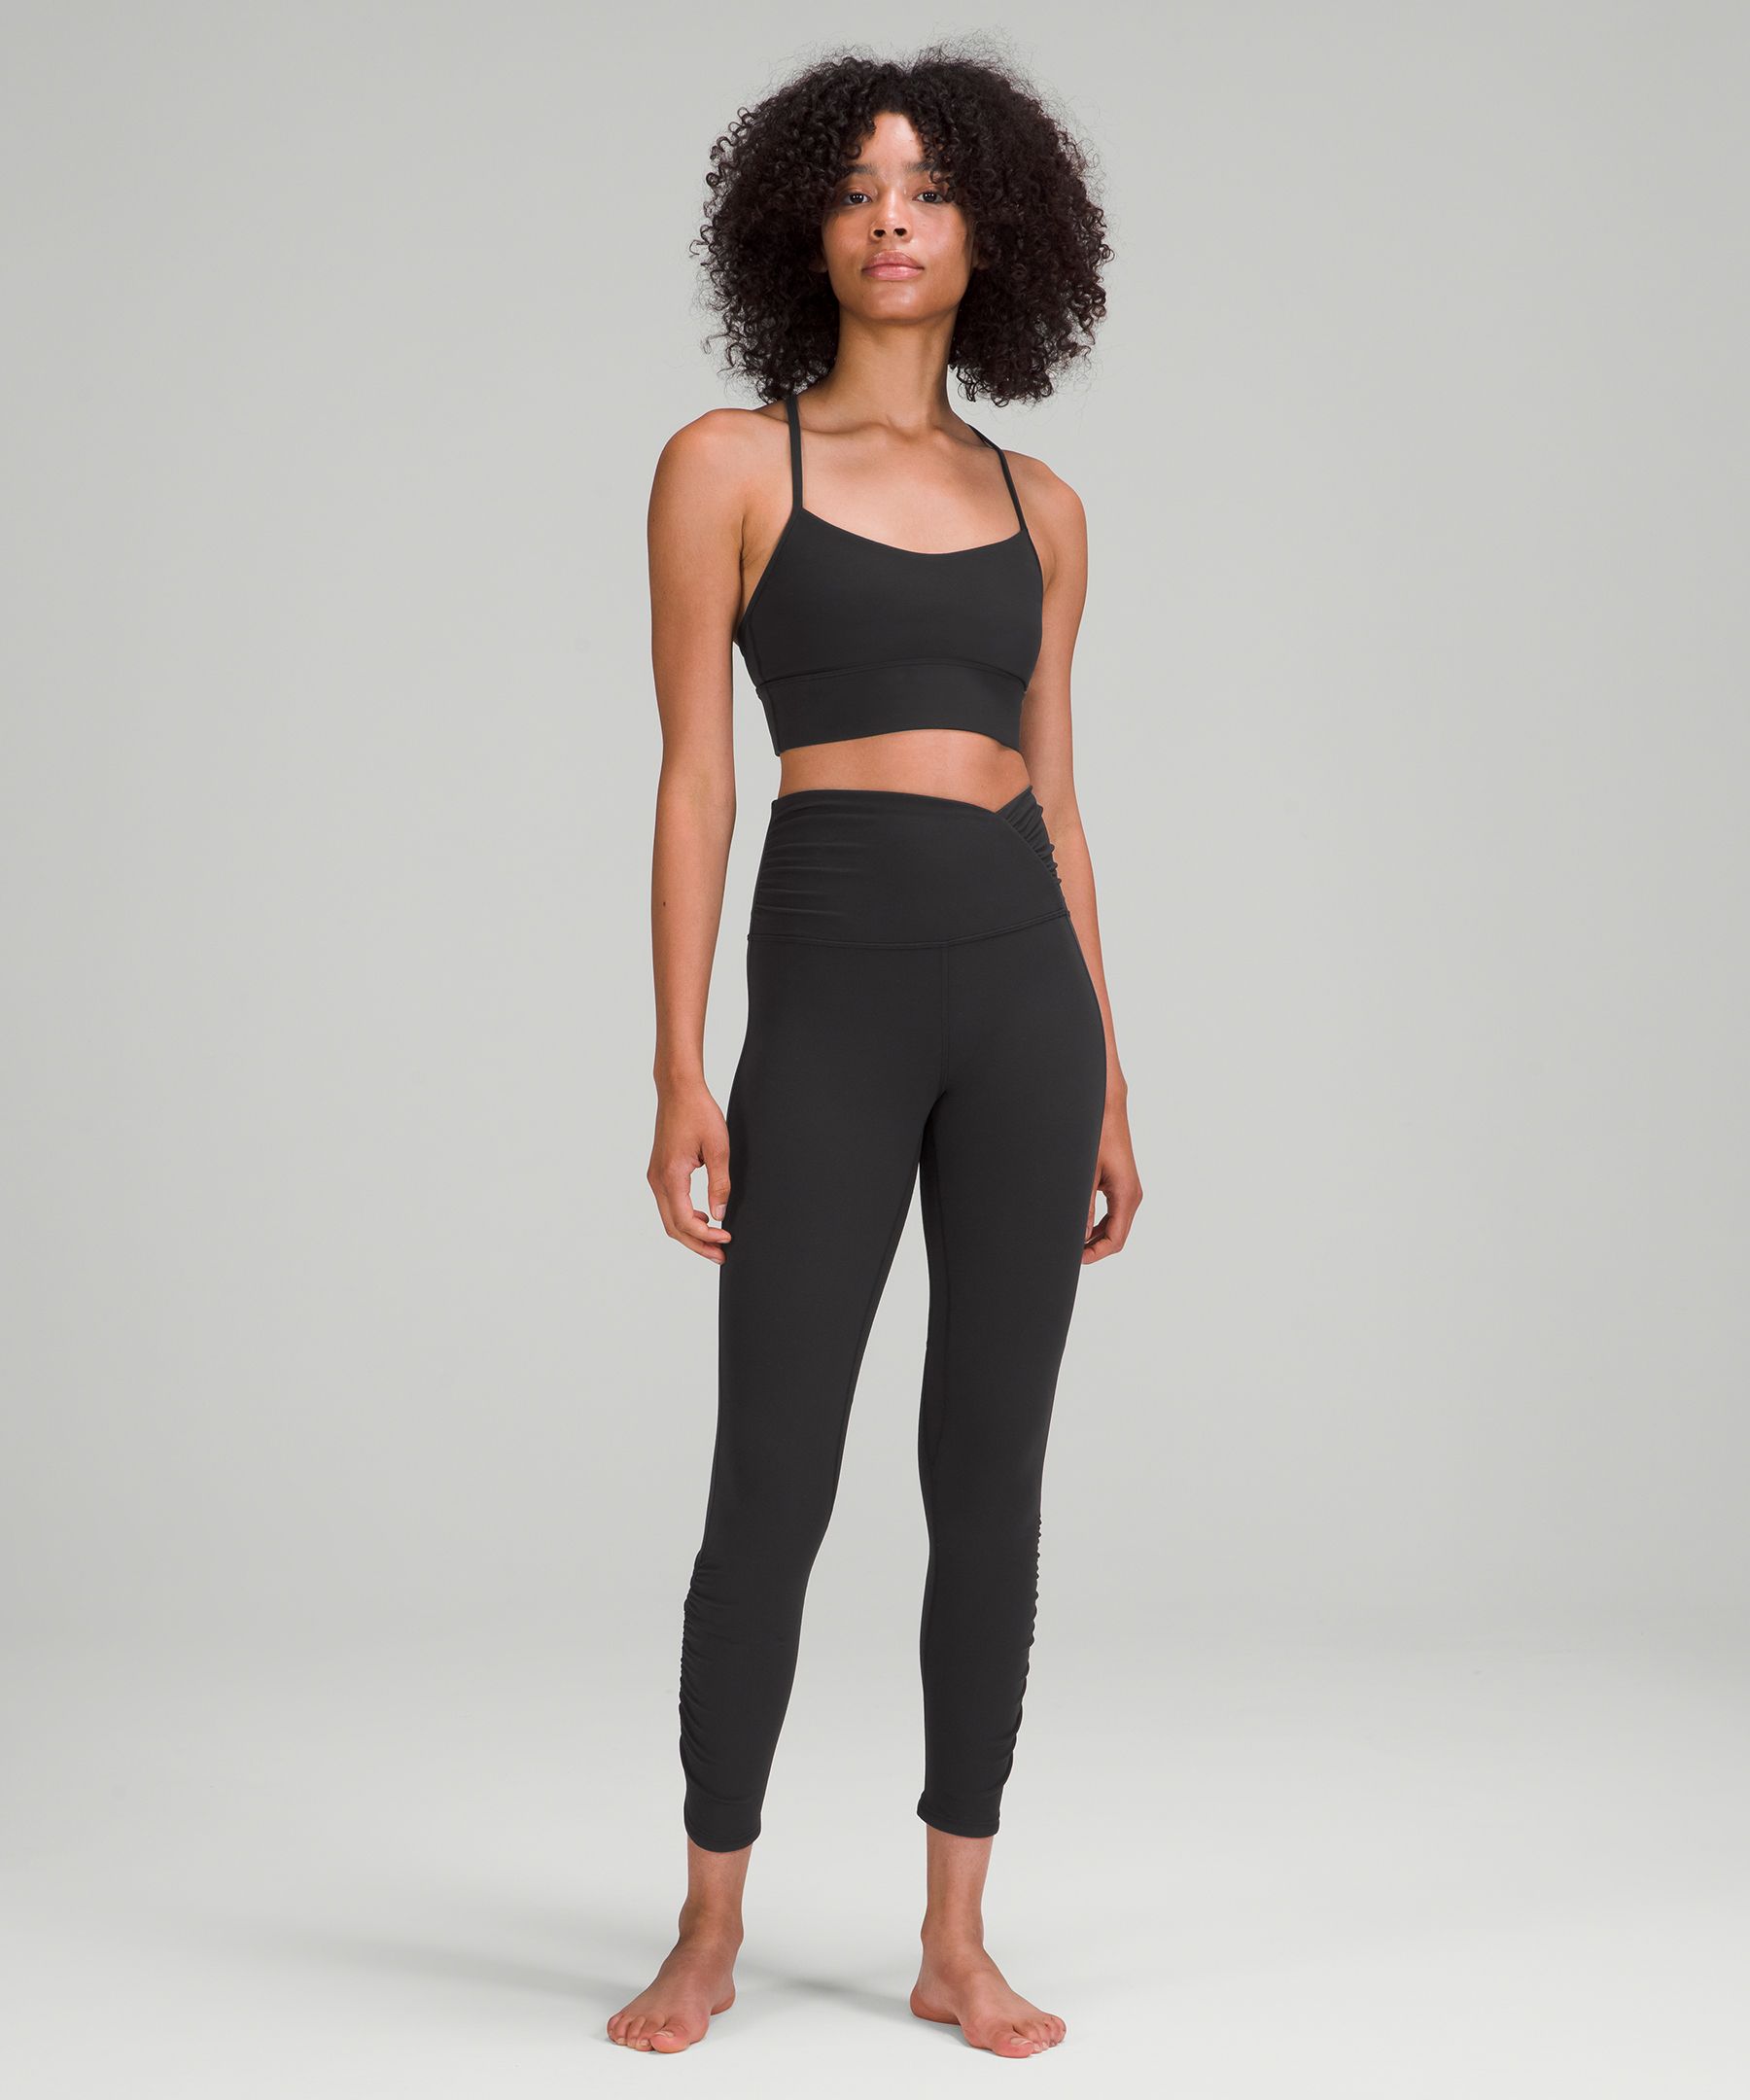 ruched waist aligns just dropped in the US! I love the waist